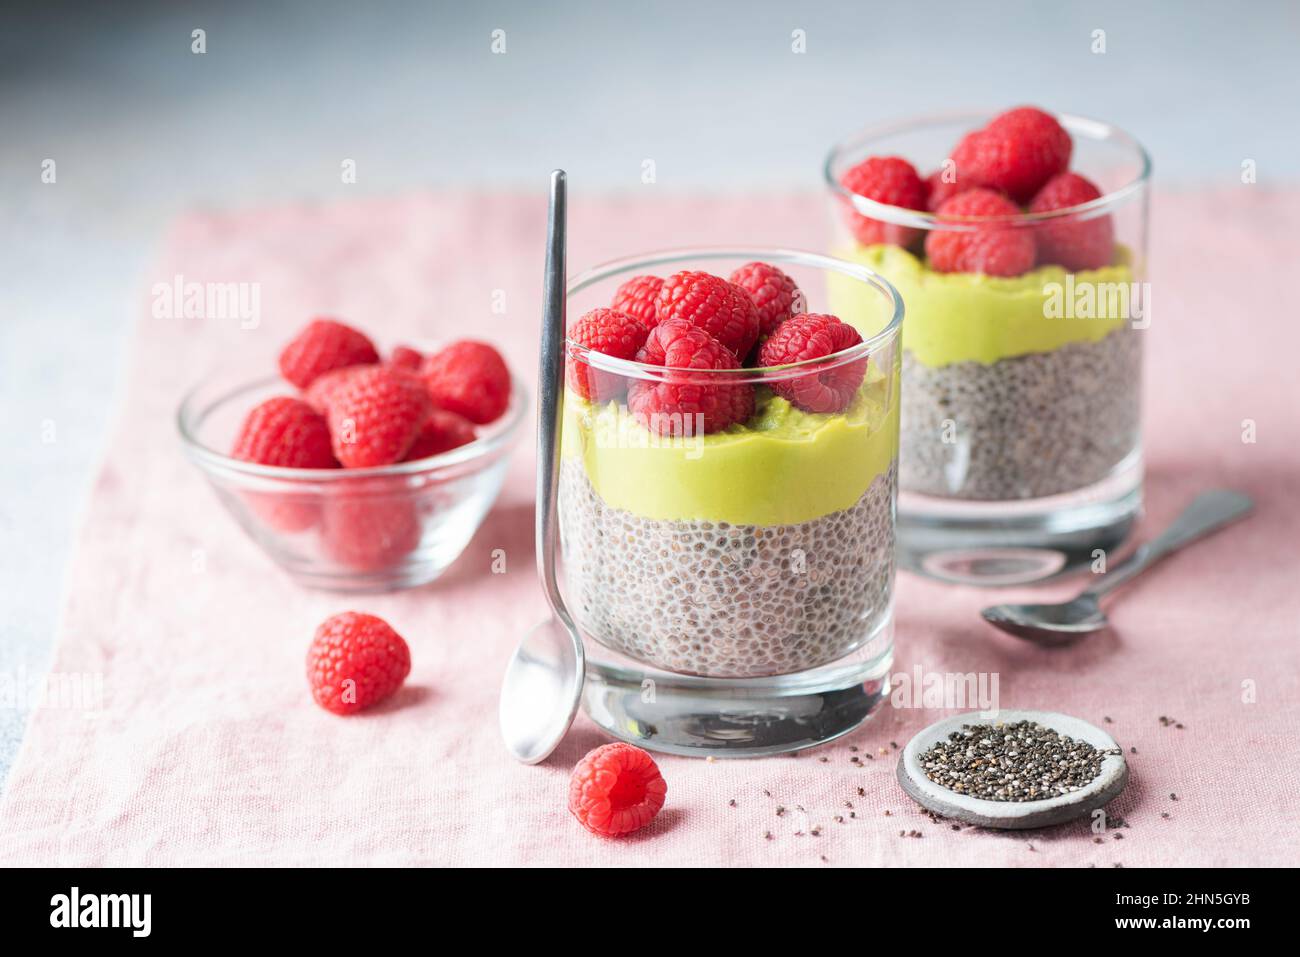 Chia pudding with avocado and raspberries in glass. Healthy vegan dessert, breakfast or snack Stock Photo